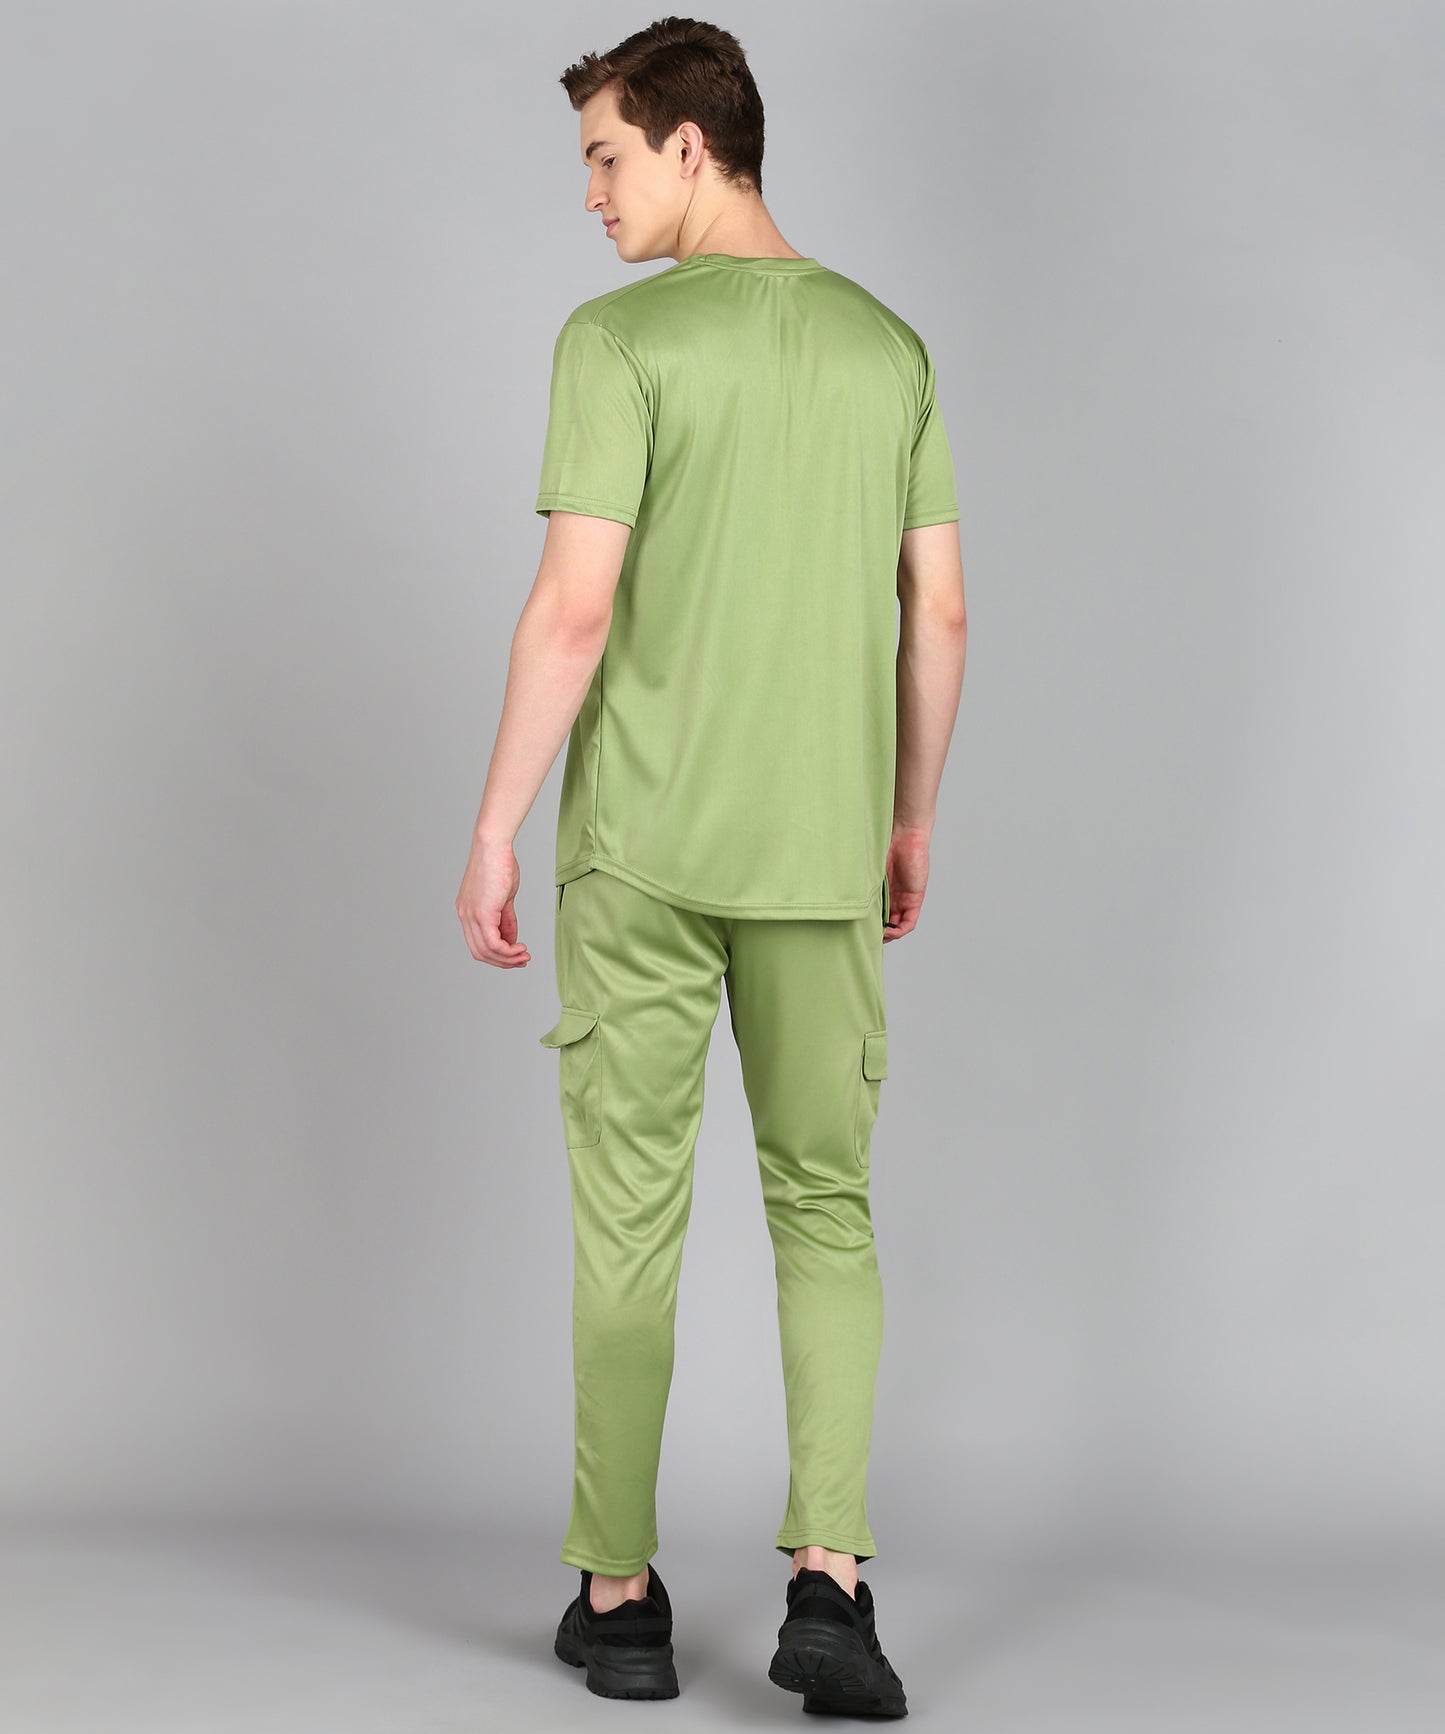 Preen Men's Pista Colour Solid T-shirt and Lower Set